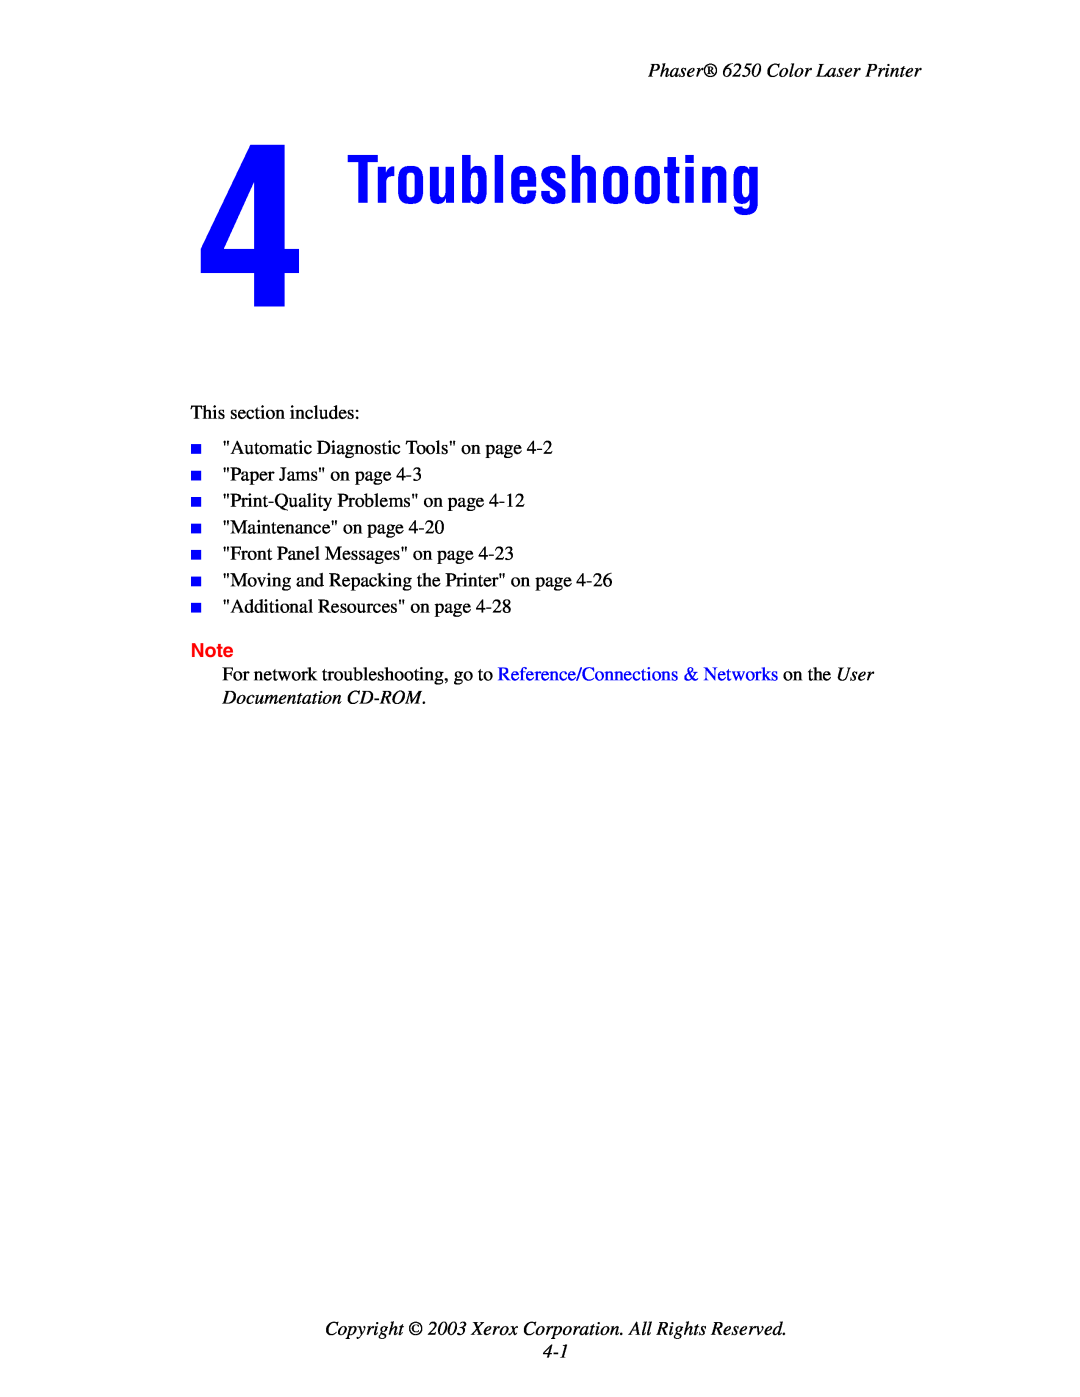 Xerox manual Troubleshooting, Copyright 2003 Xerox Corporation. All Rights Reserved 4-1, Phaser 6250 Color Laser Printer 